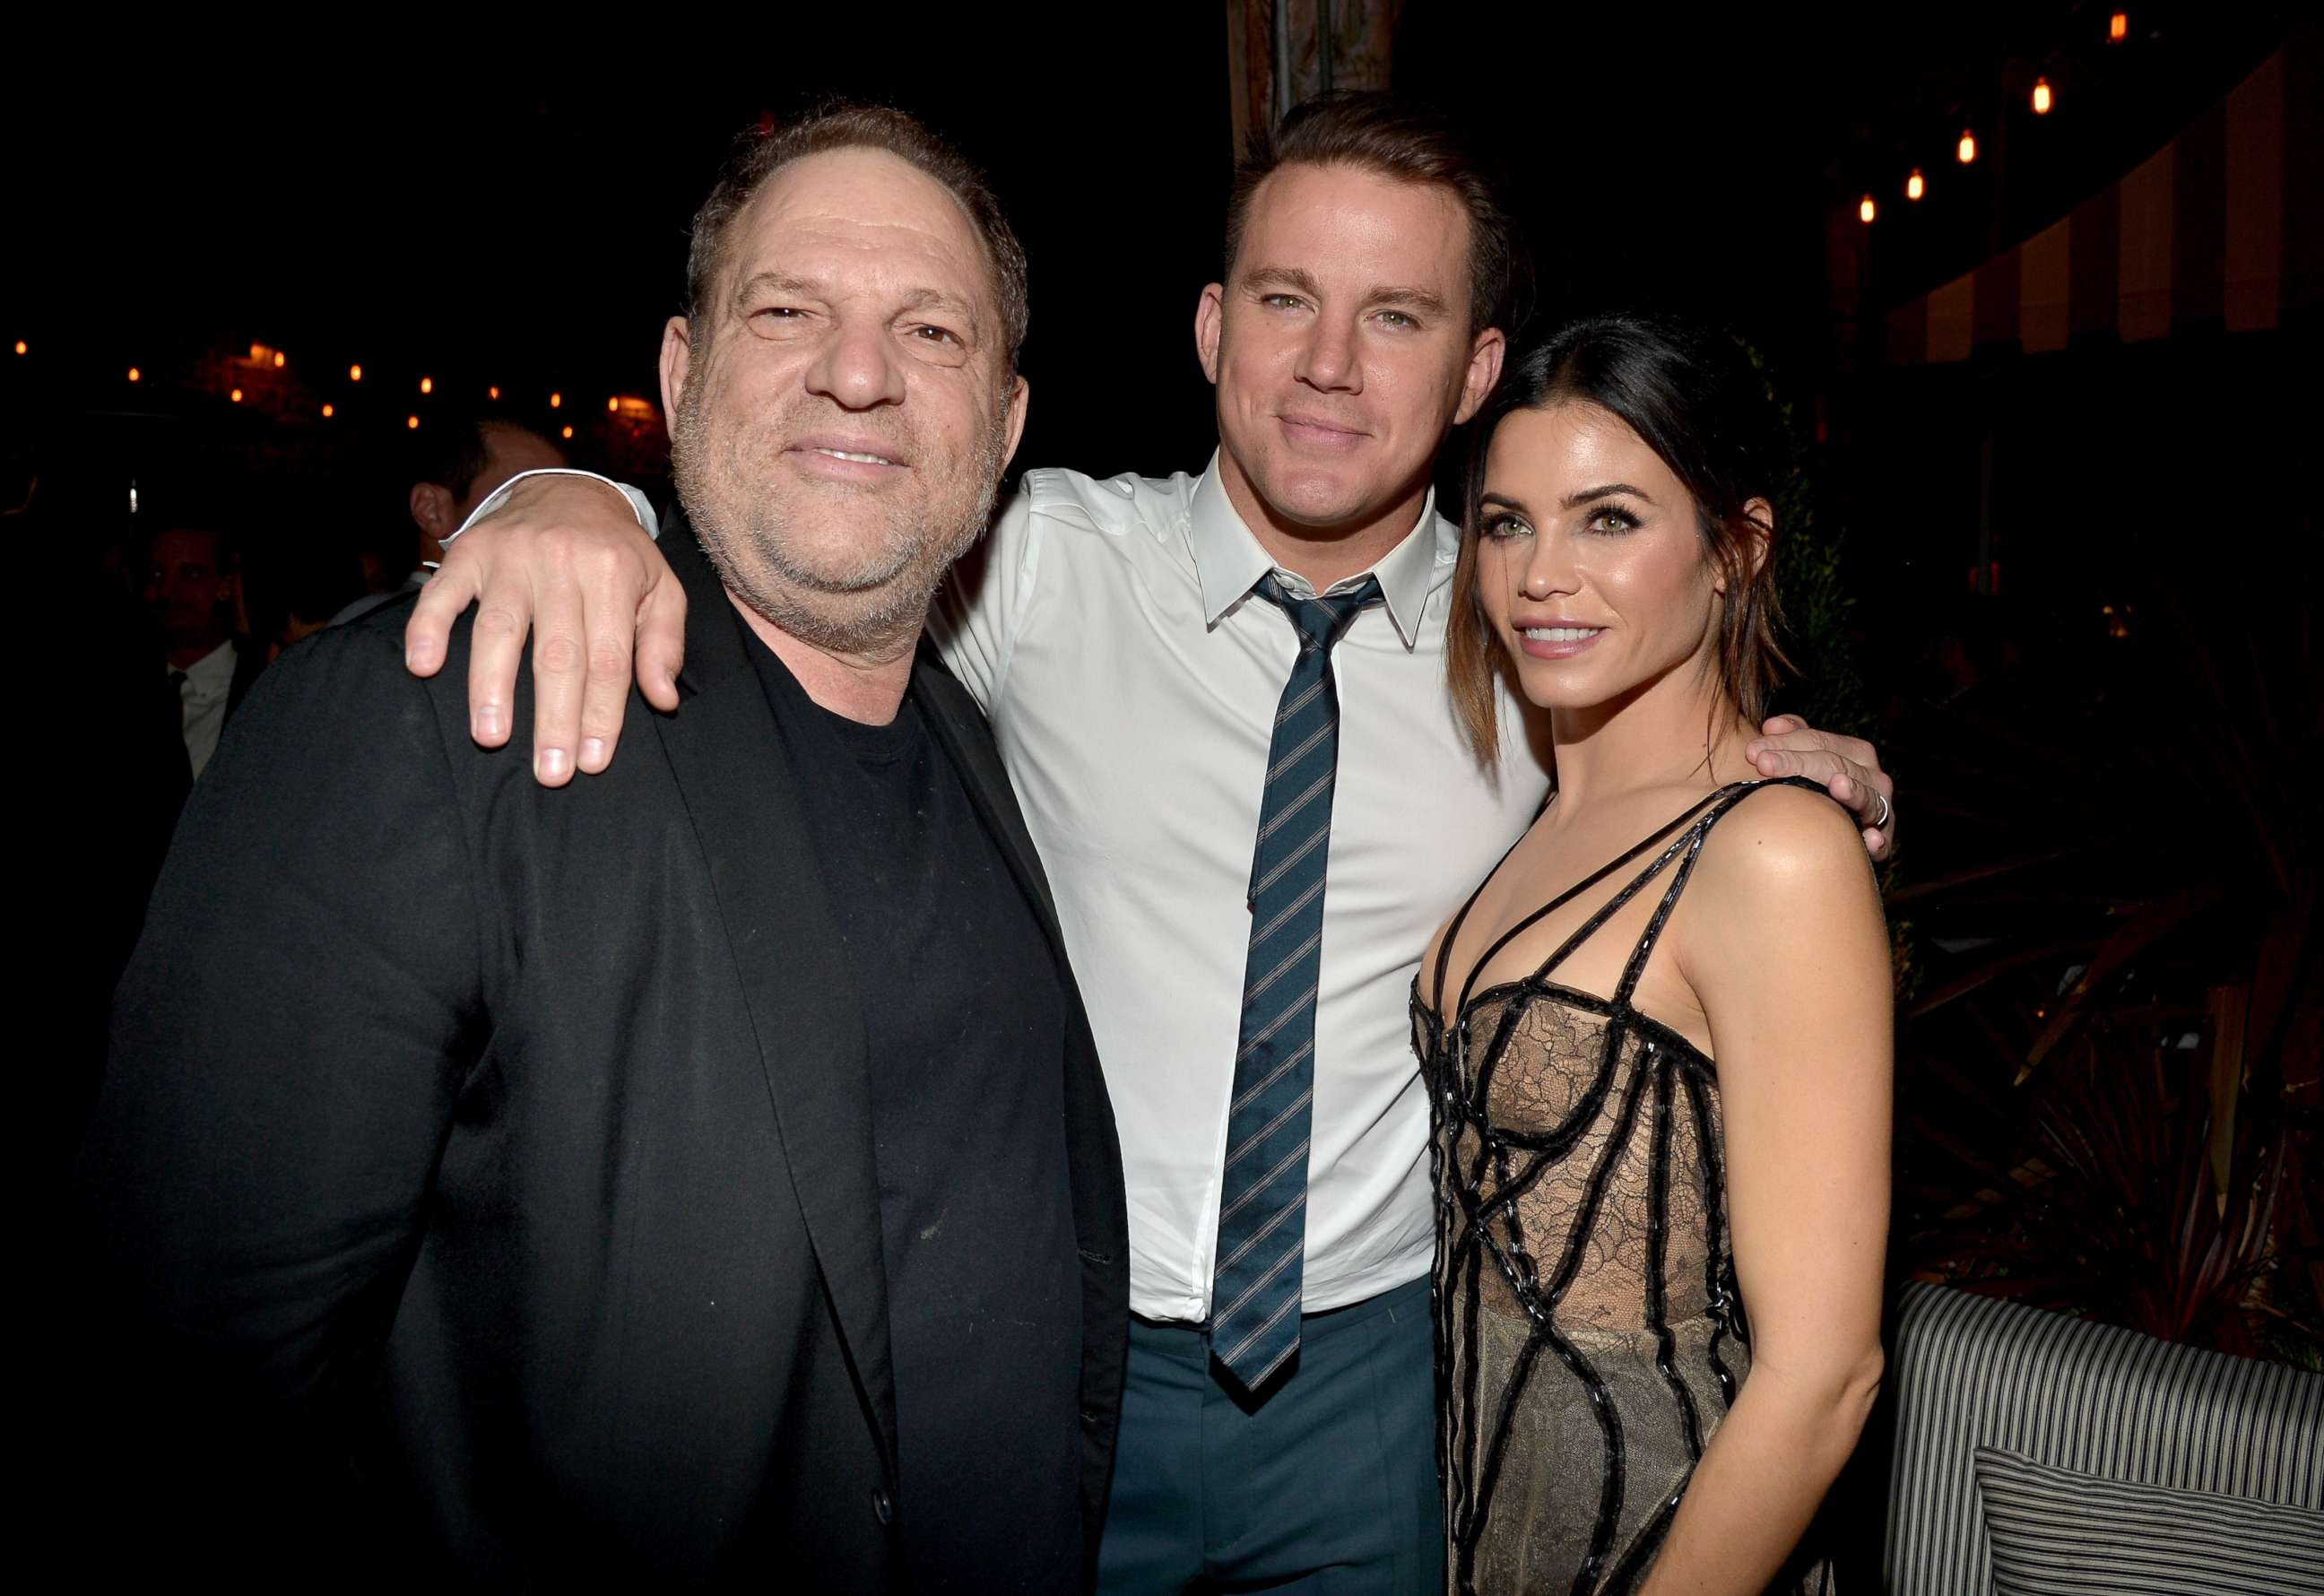 PHOTO: Producer Harvey Weinstein, actors Channing Tatum, and Jenna Dewan attend the world premiere of "The Hateful Eight" presented by The Weinstein Company on Dec. 7, 2015 in Hollywood, Calif.